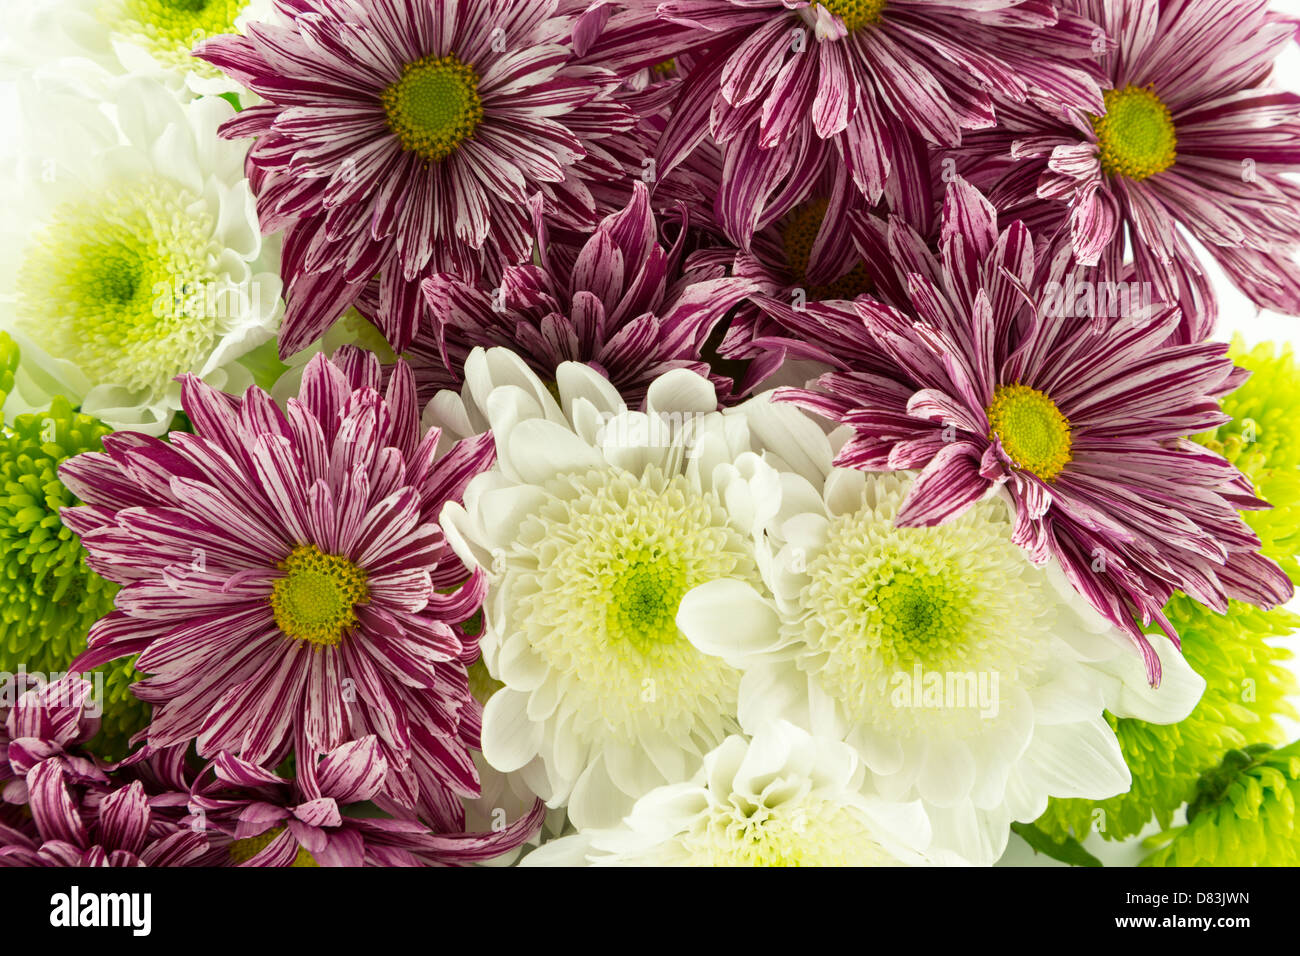 Red striped,green and white chrysanthemum flowers. Stock Photo